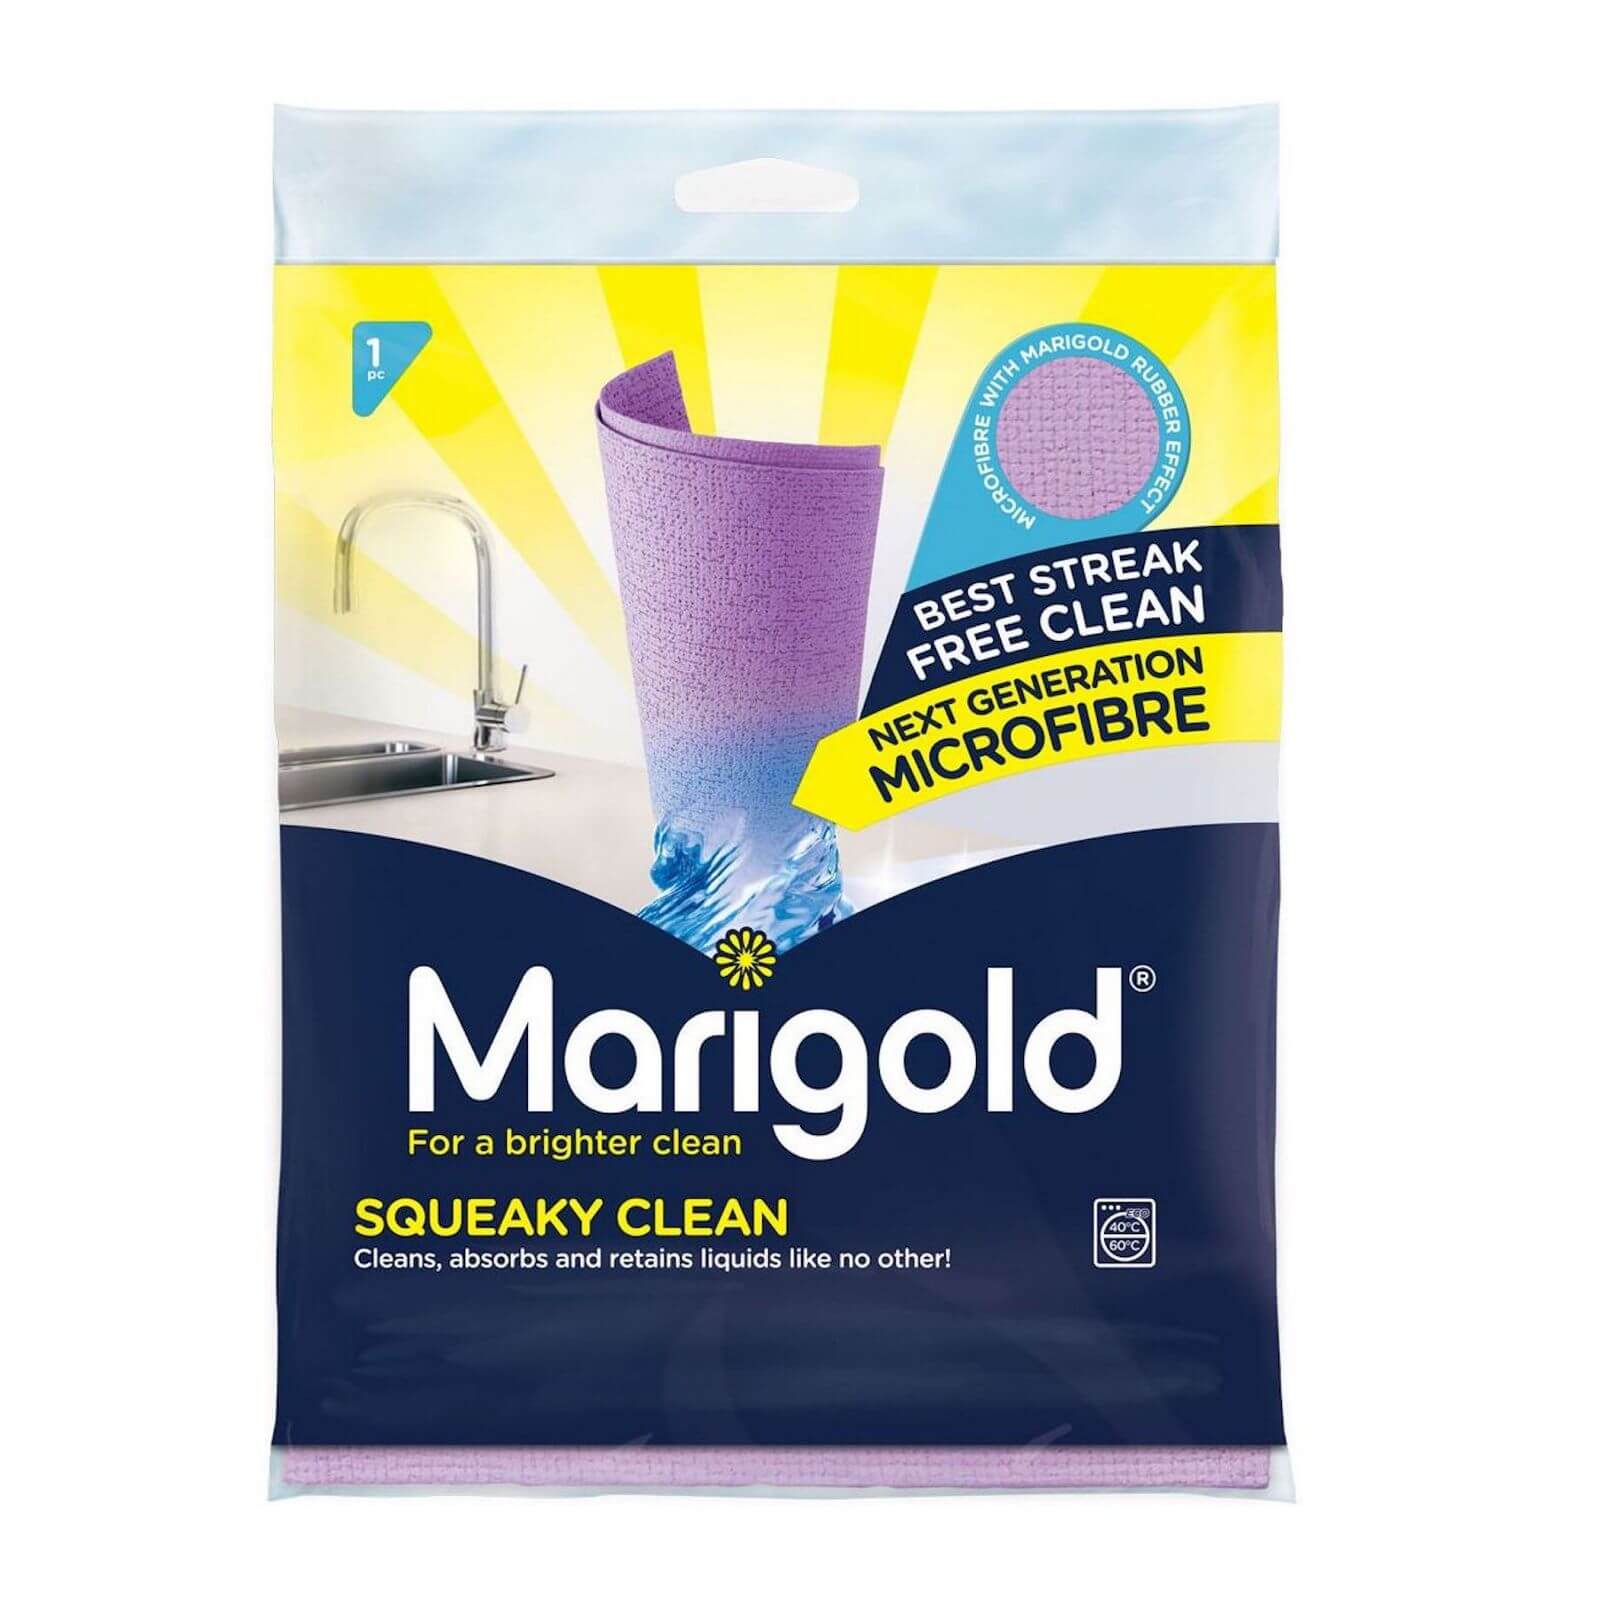 Photo of Marigold Squeaky Clean Pu Mf Cloth